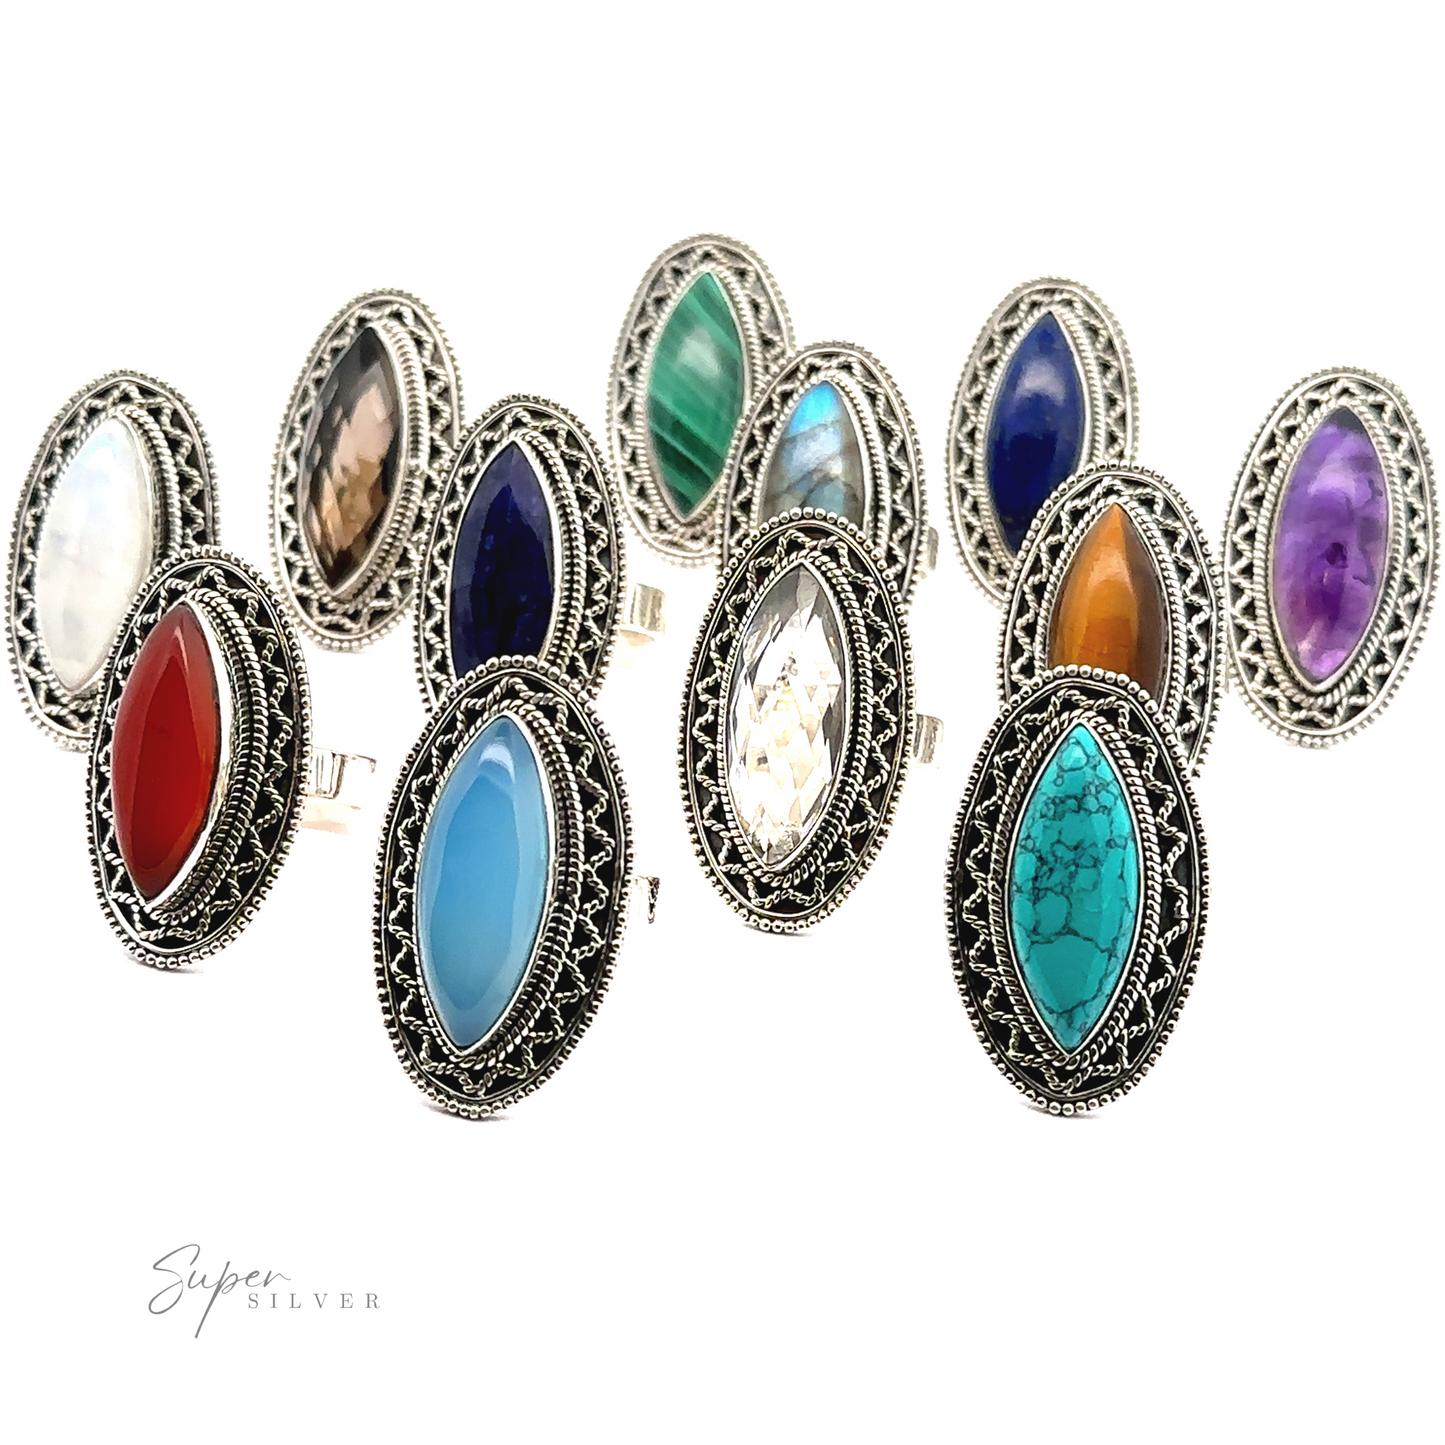 A collection of vintage-style rings with various colorful gemstones, including blue, red, green, and purple. Each piece features ornate sterling silver bands with intricate detailing and a Bohemian twist. The highlight is the Marquise Shaped Gemstone Ring With Vintage Shield Border that truly stands out.